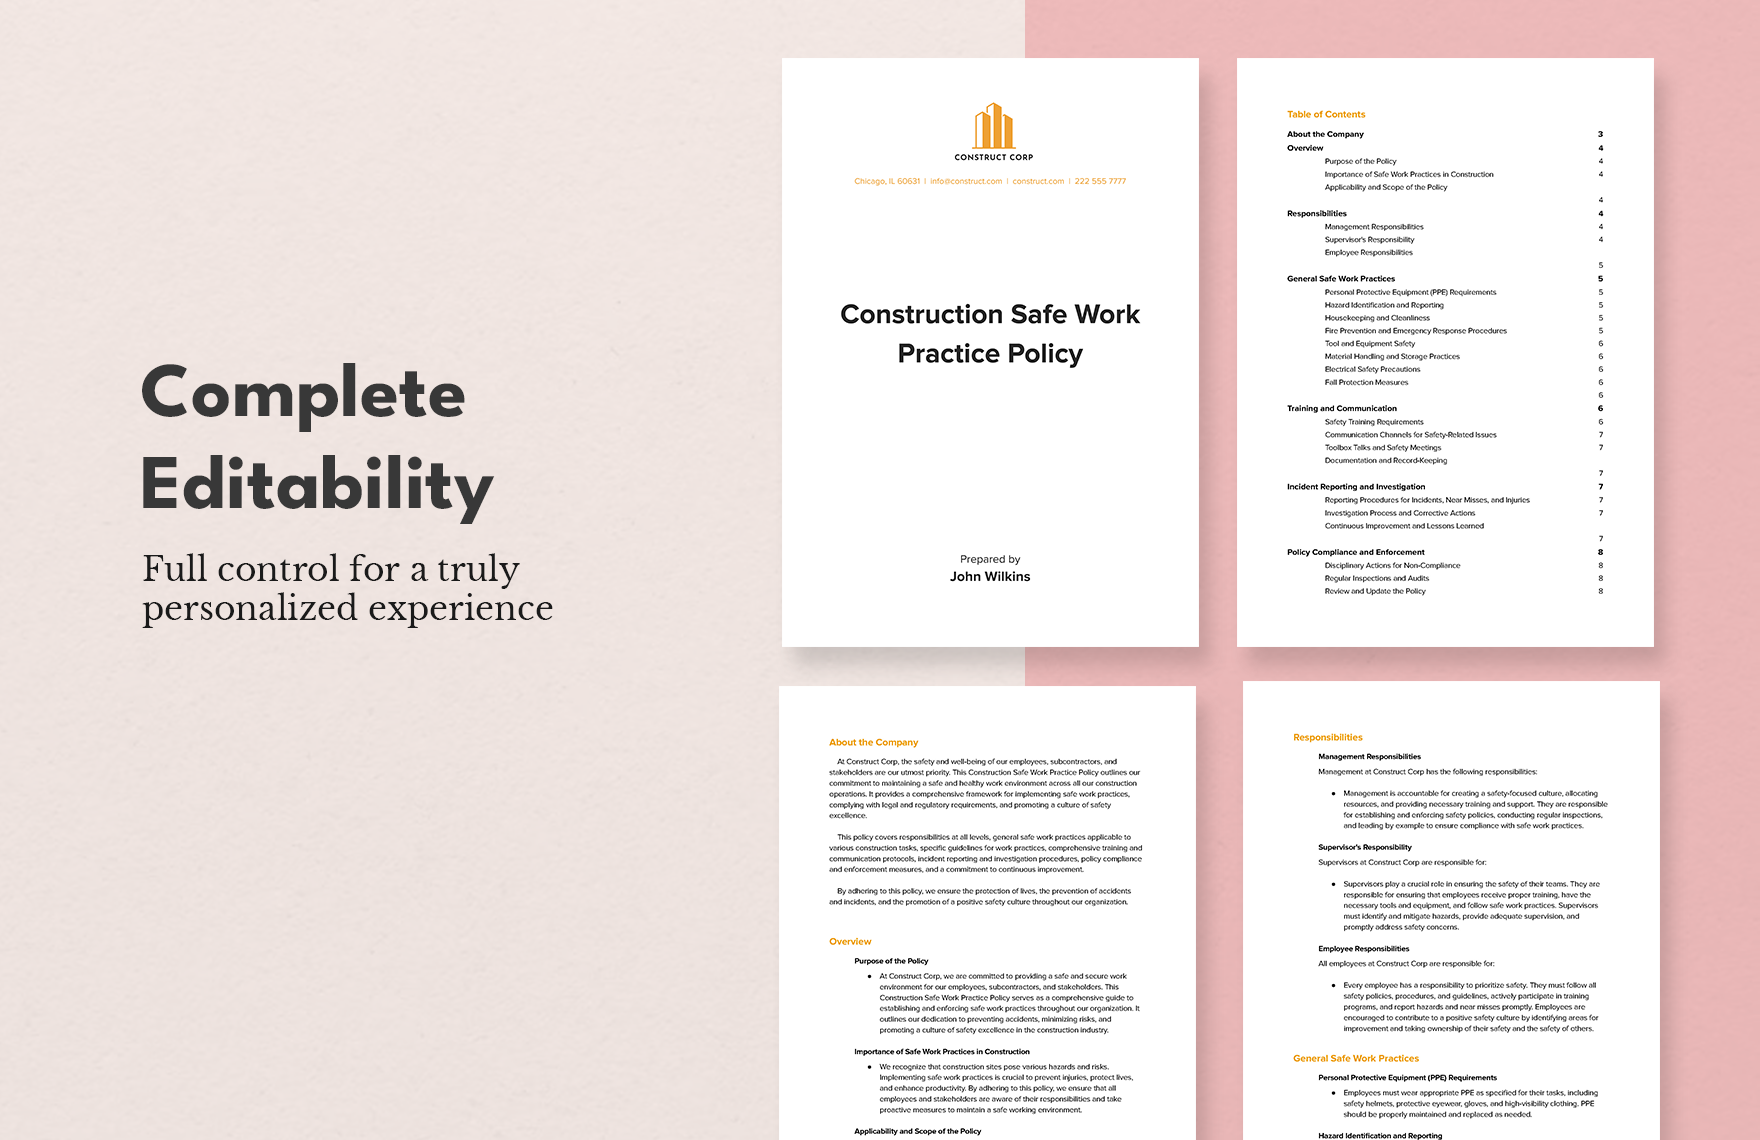 Construction Safe Work Practice Policy Template